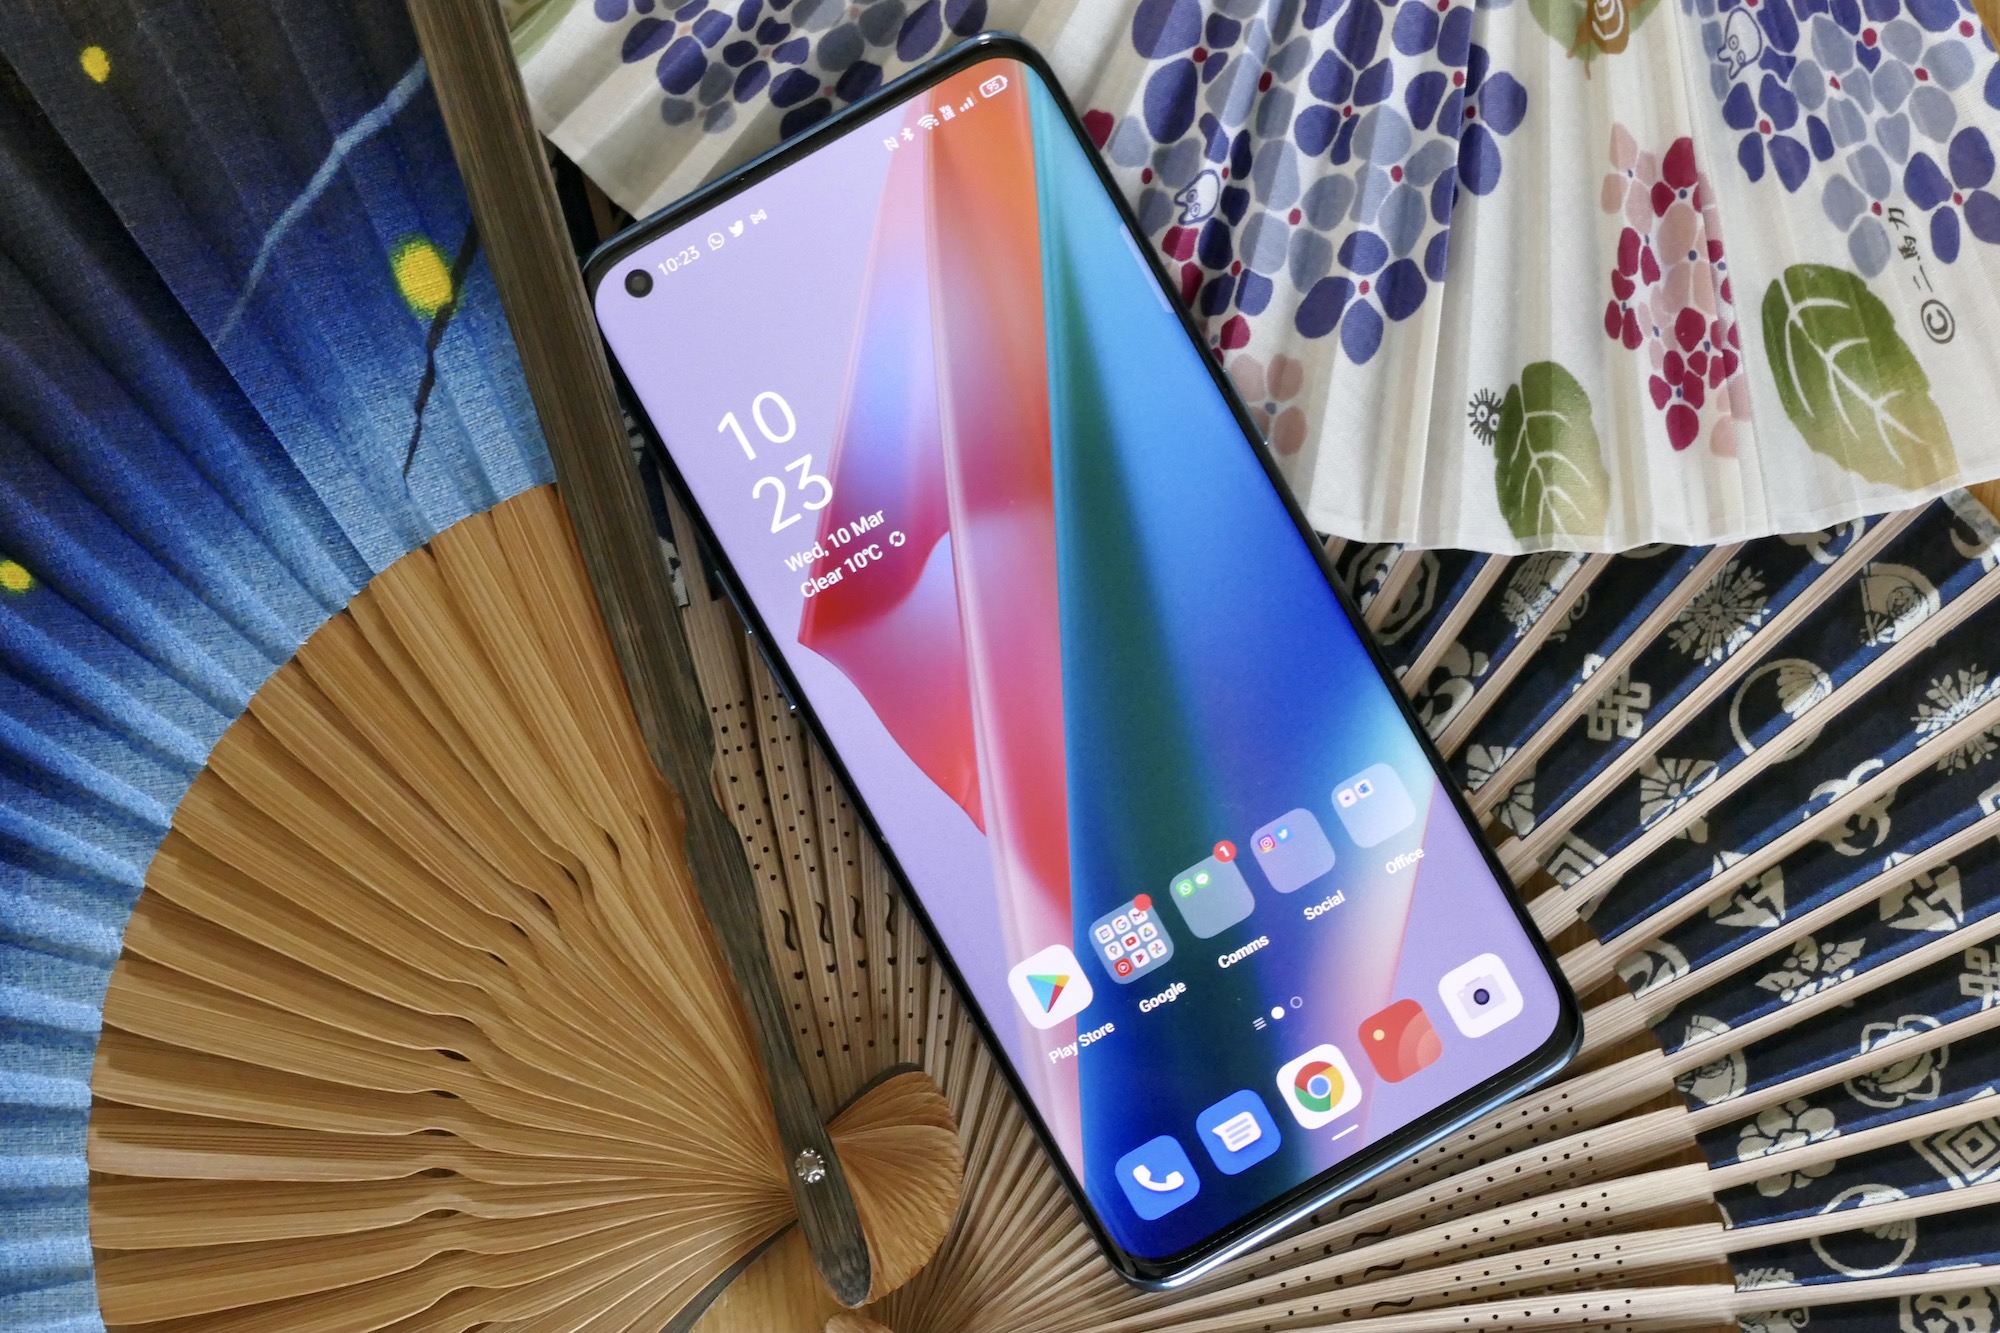 Oppo Find X3 Pro Review: Camera Consistency At Last